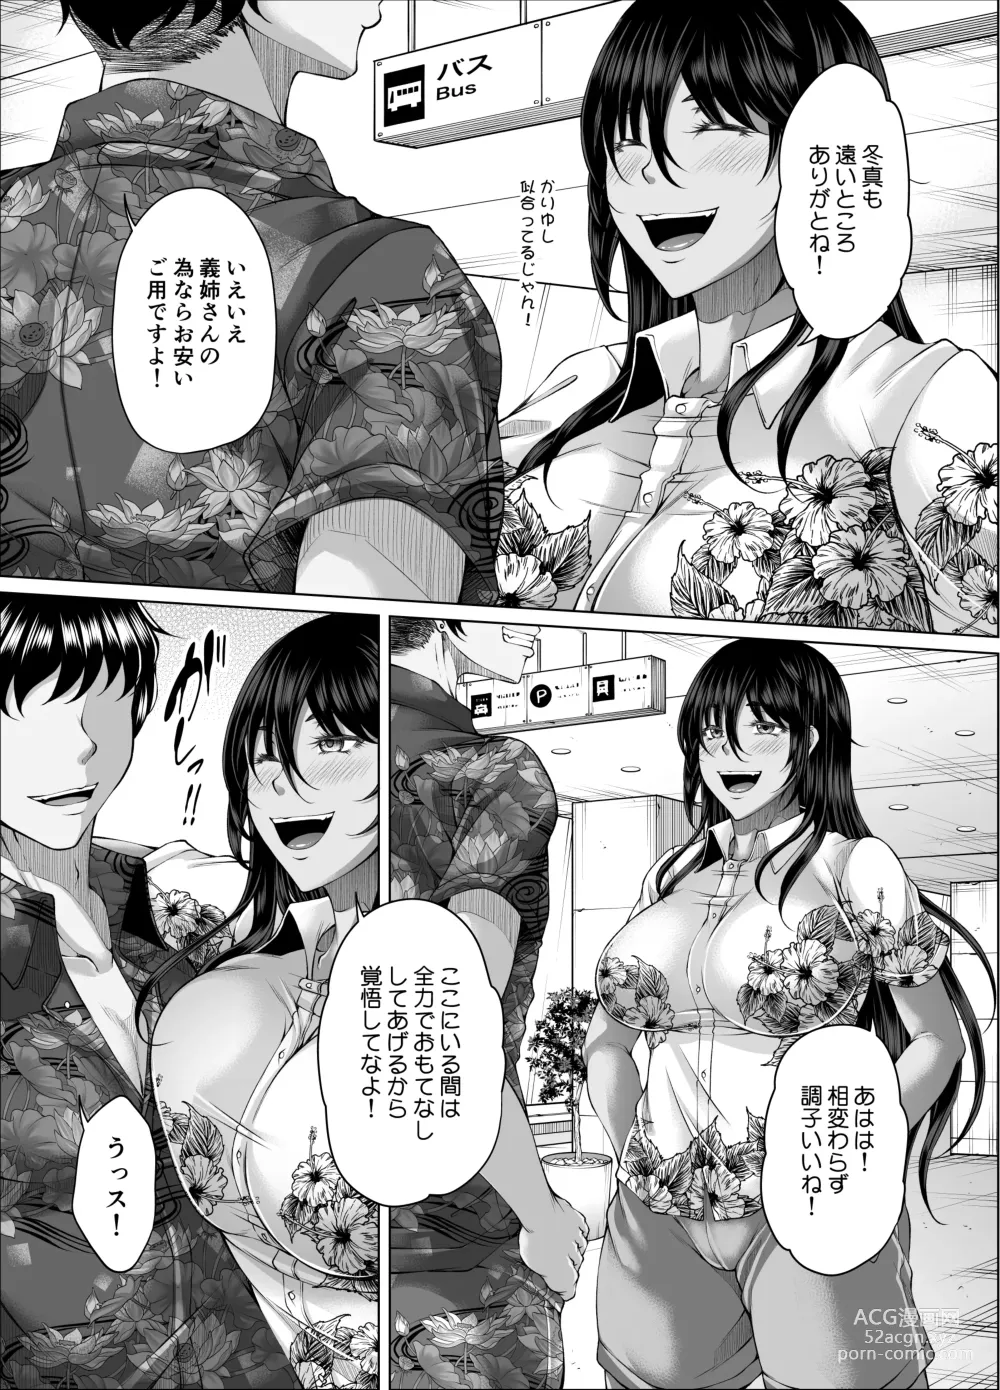 Page 6 of doujinshi 琉球勝気兄嫁は押しに弱くて欲求不満